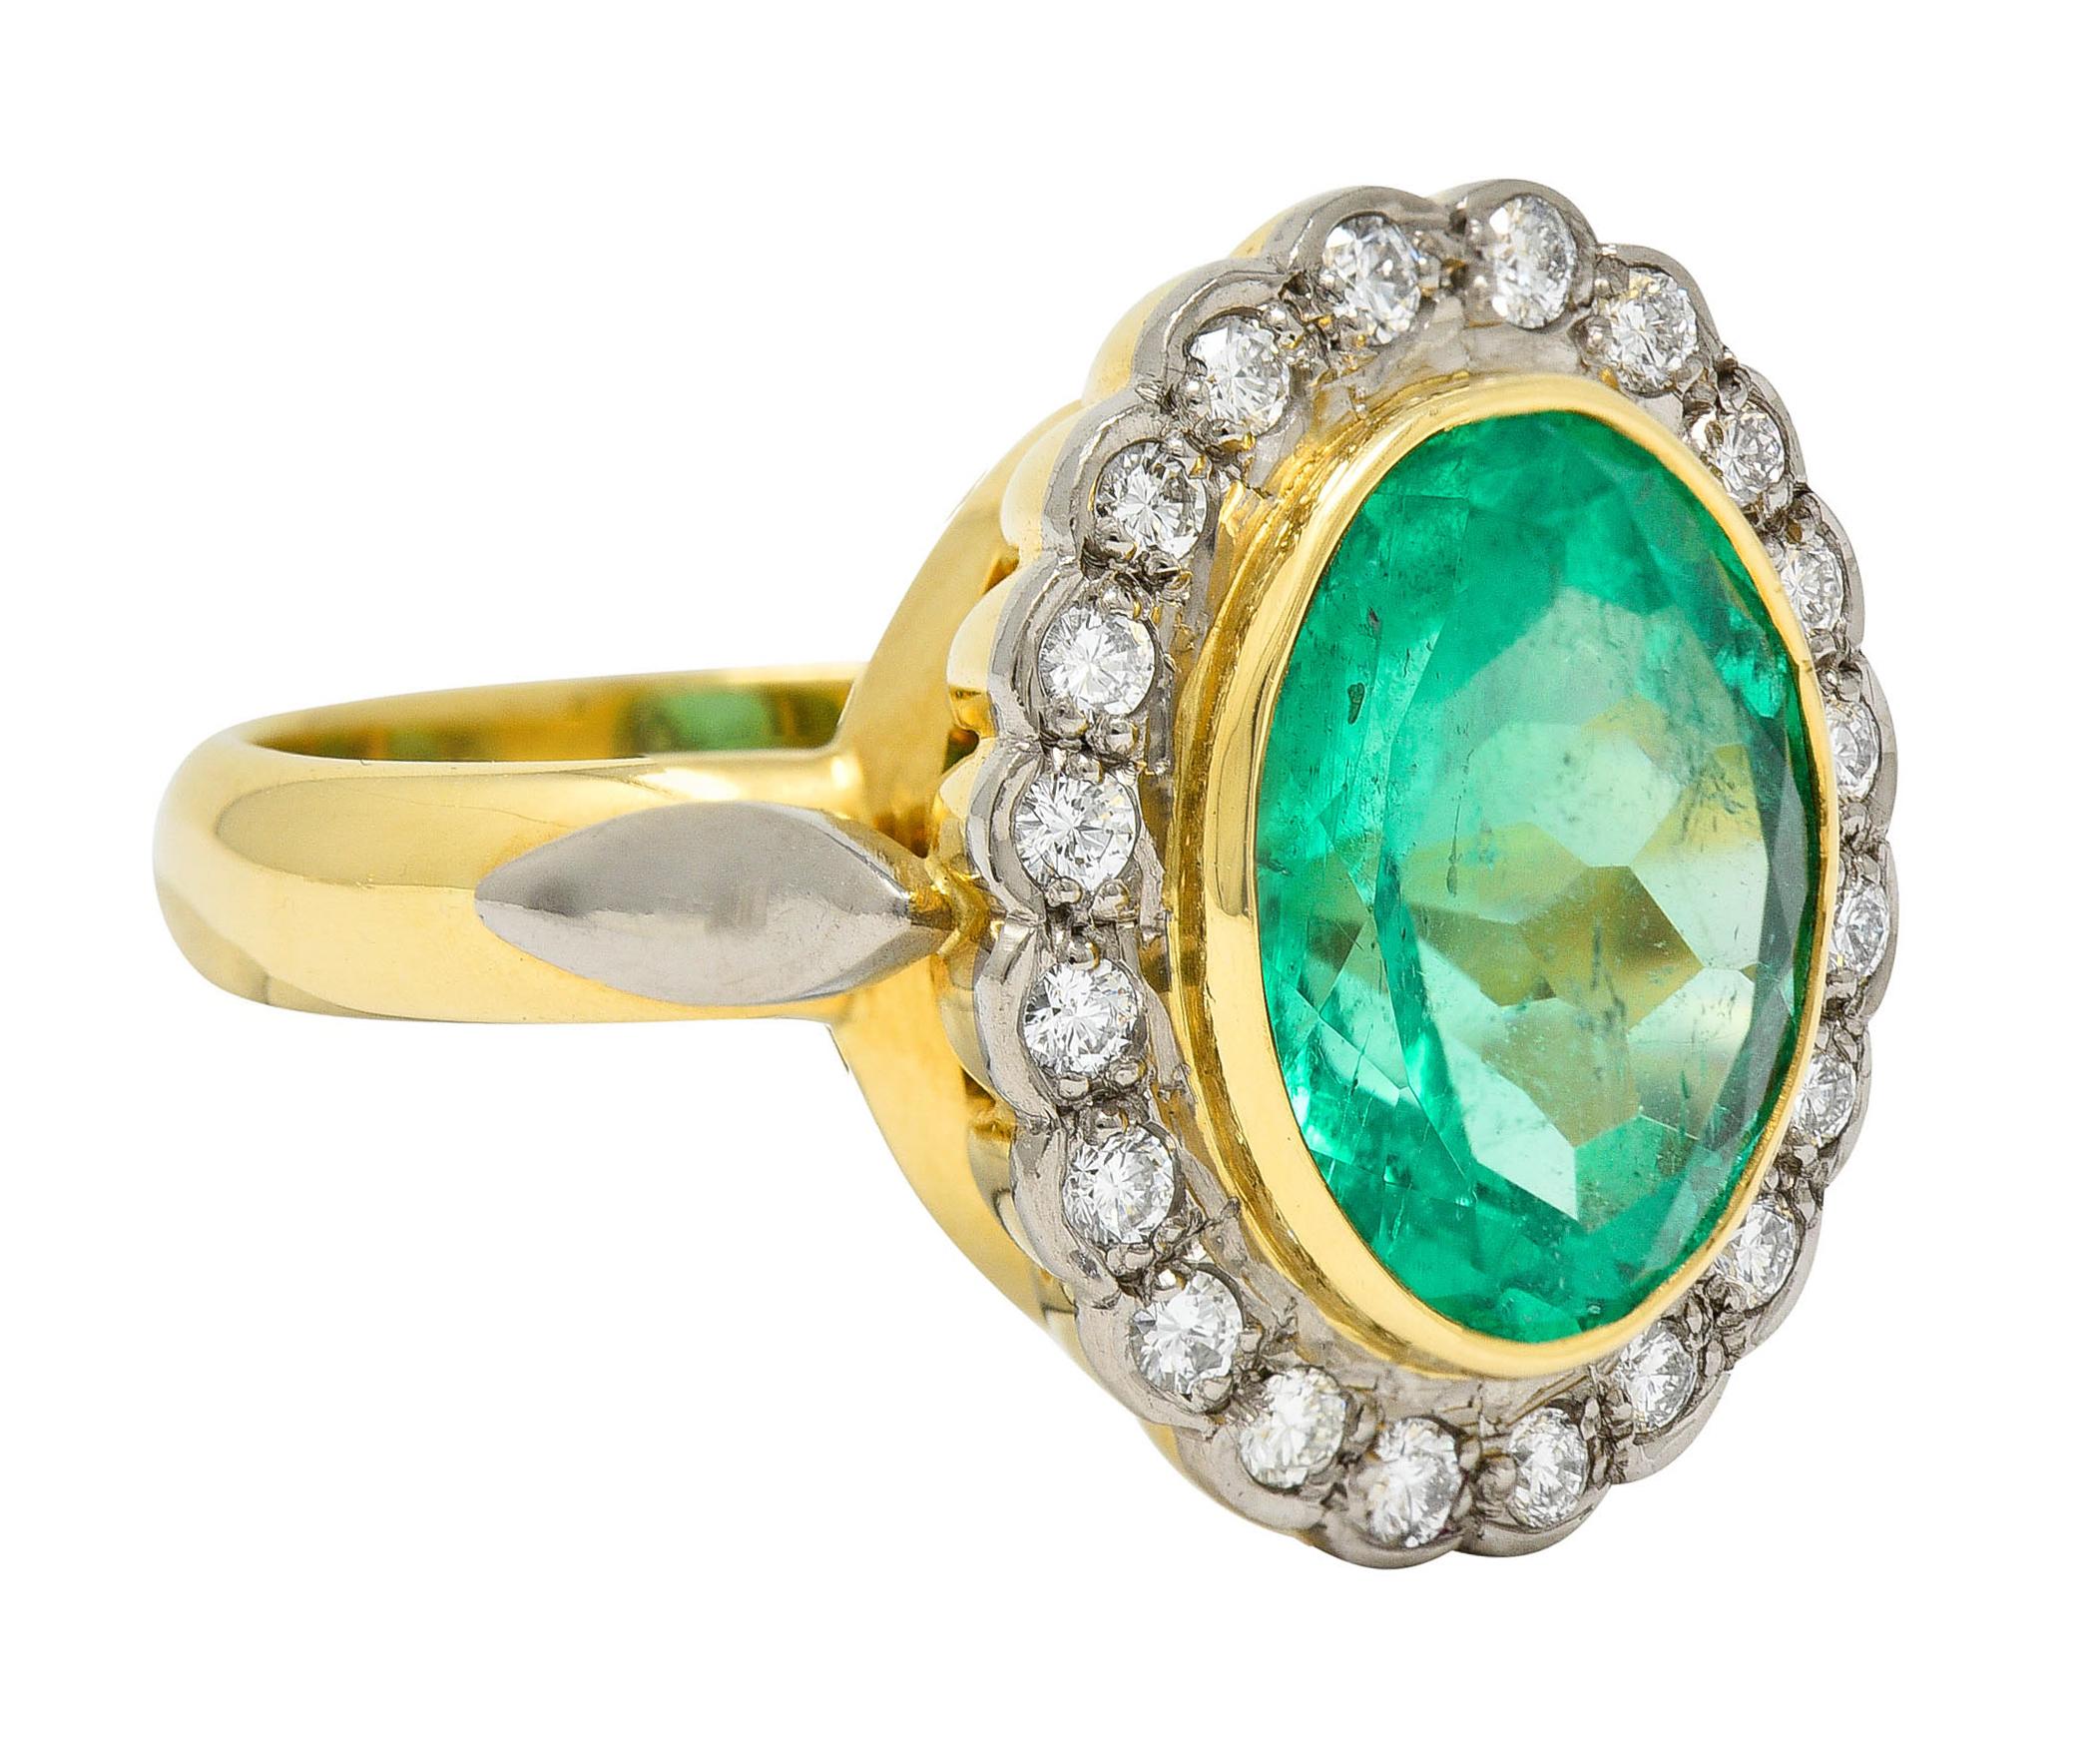 Centering a mixed oval cut Colombian emerald weighing approximately 5.55 carats

Semi-transparent and vibrantly green in color with minor enhancement

Bezel set in a polished gold surround with a round brilliant cut diamonds halo - set in scalloped